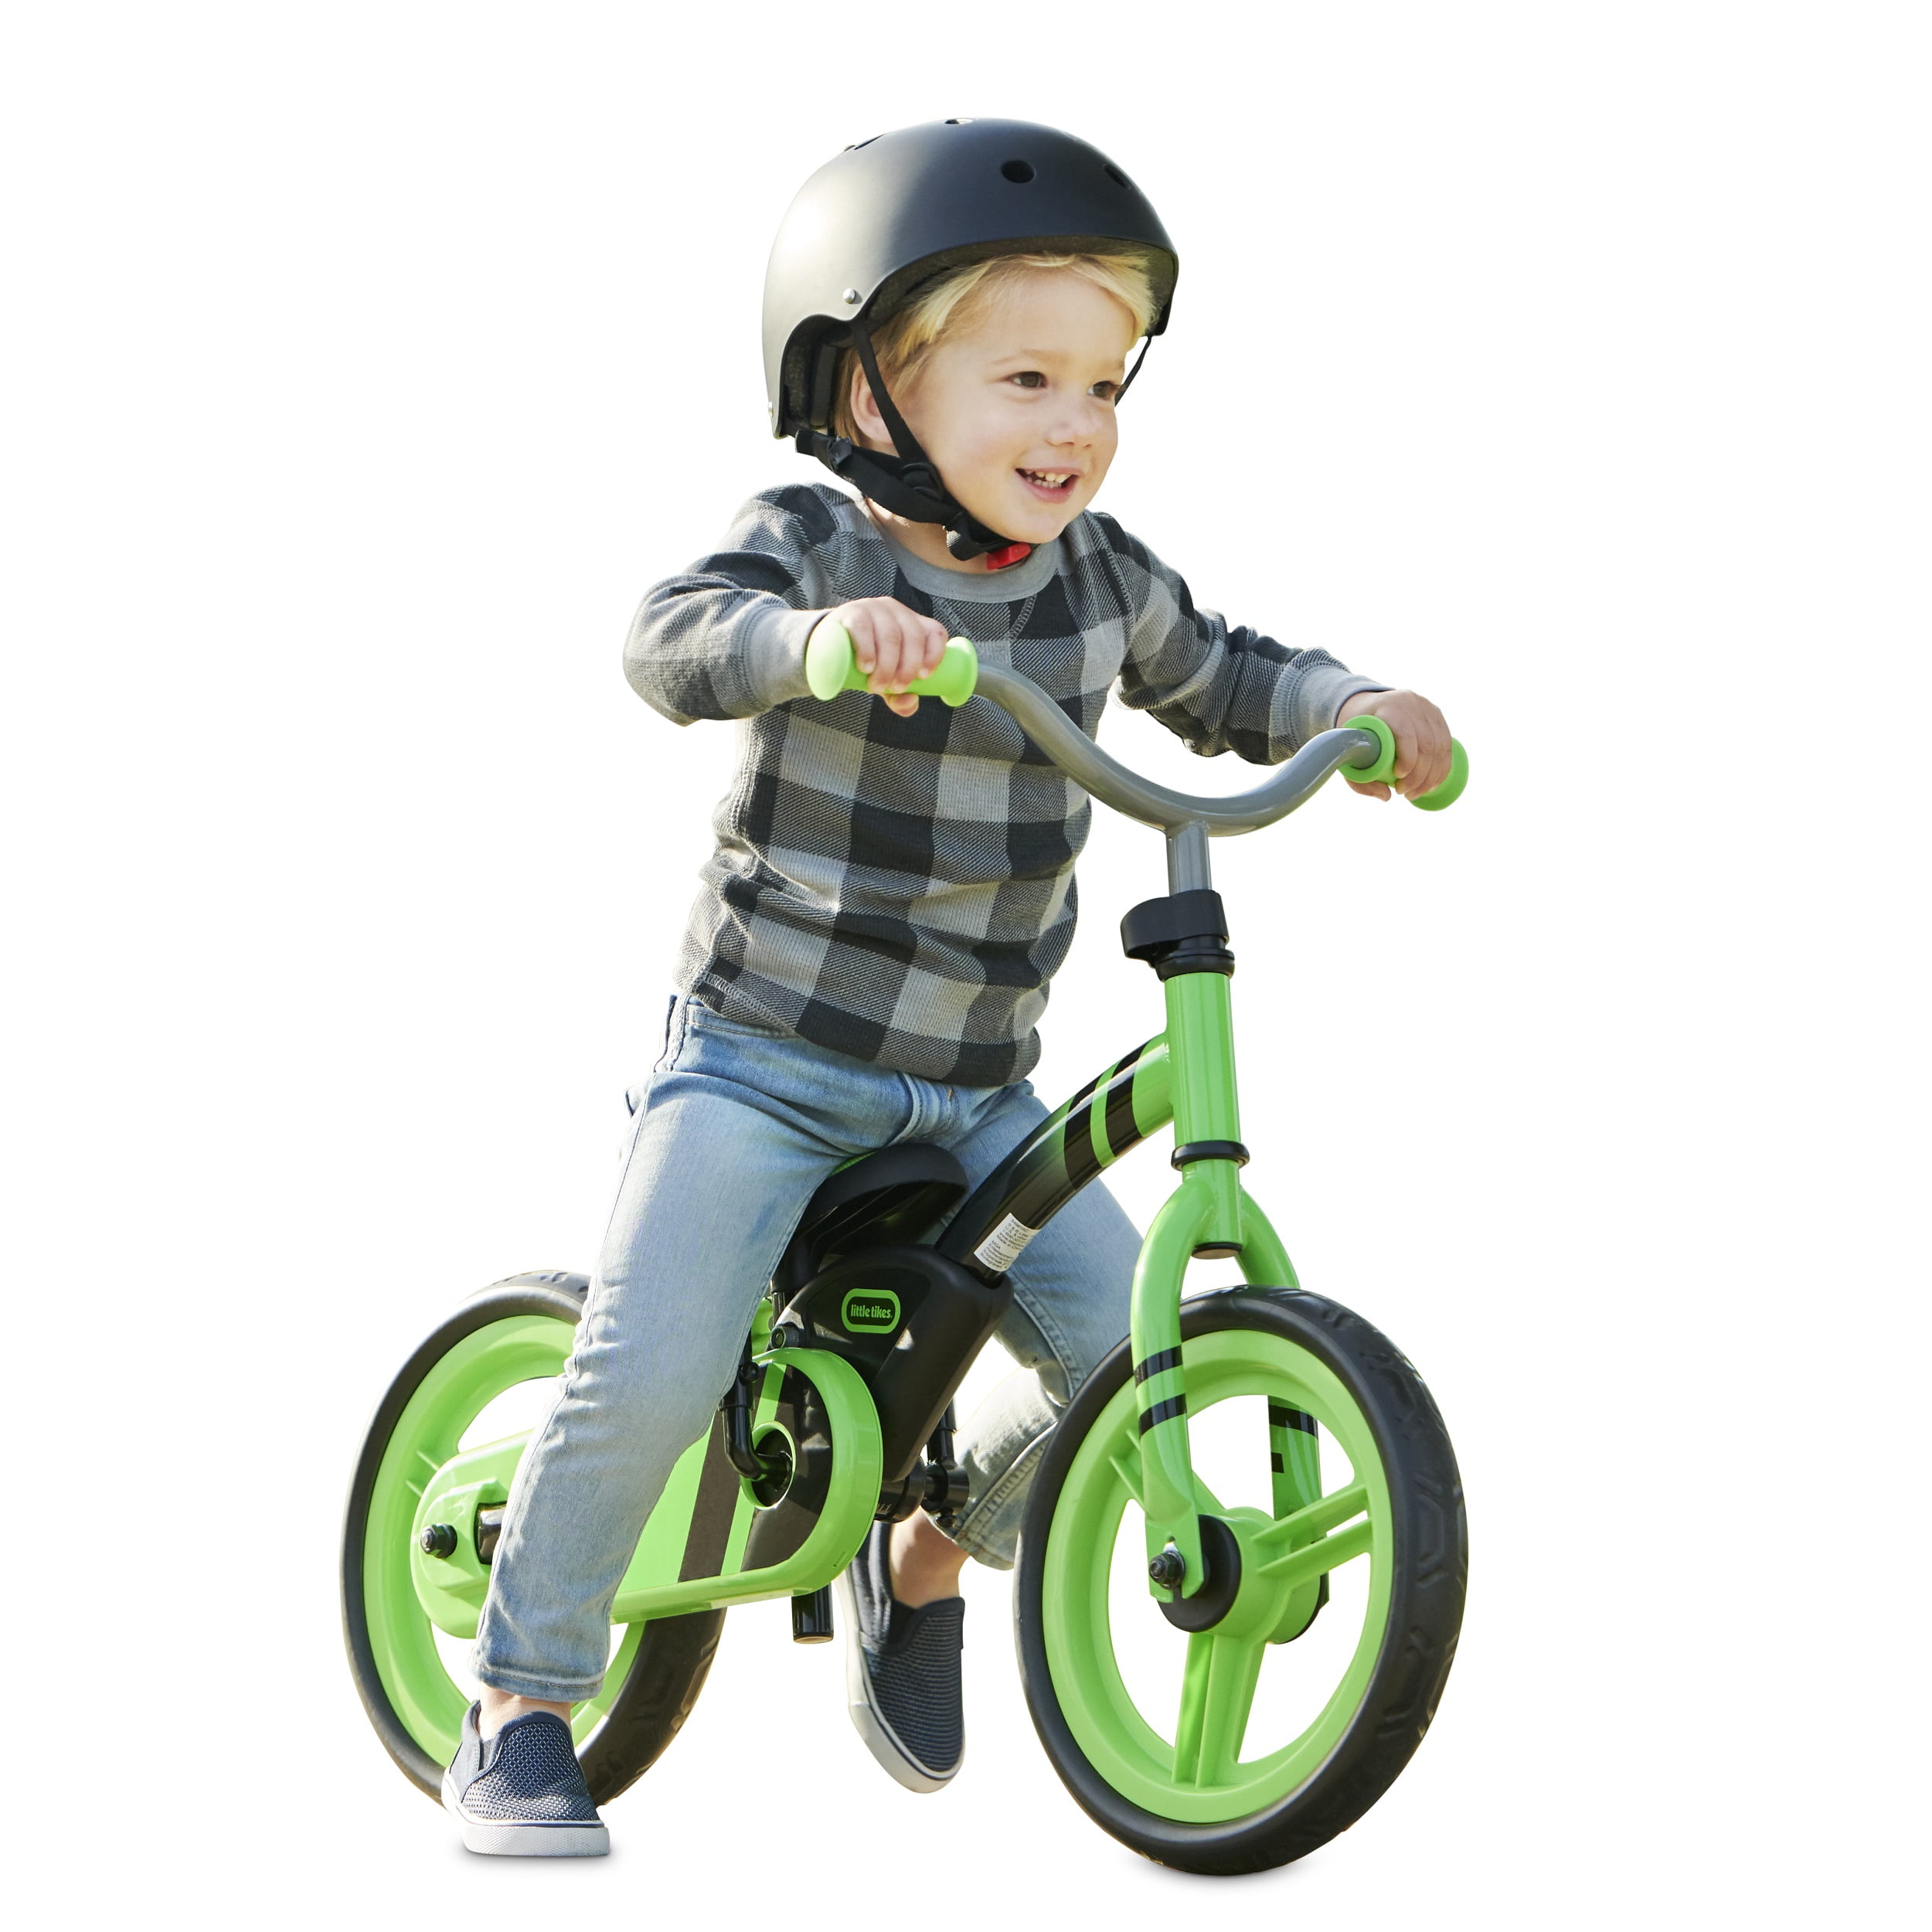 12'' Kids Children Training Balance Bike No Pedal Bicycle Ride Scooter Toys Gift 